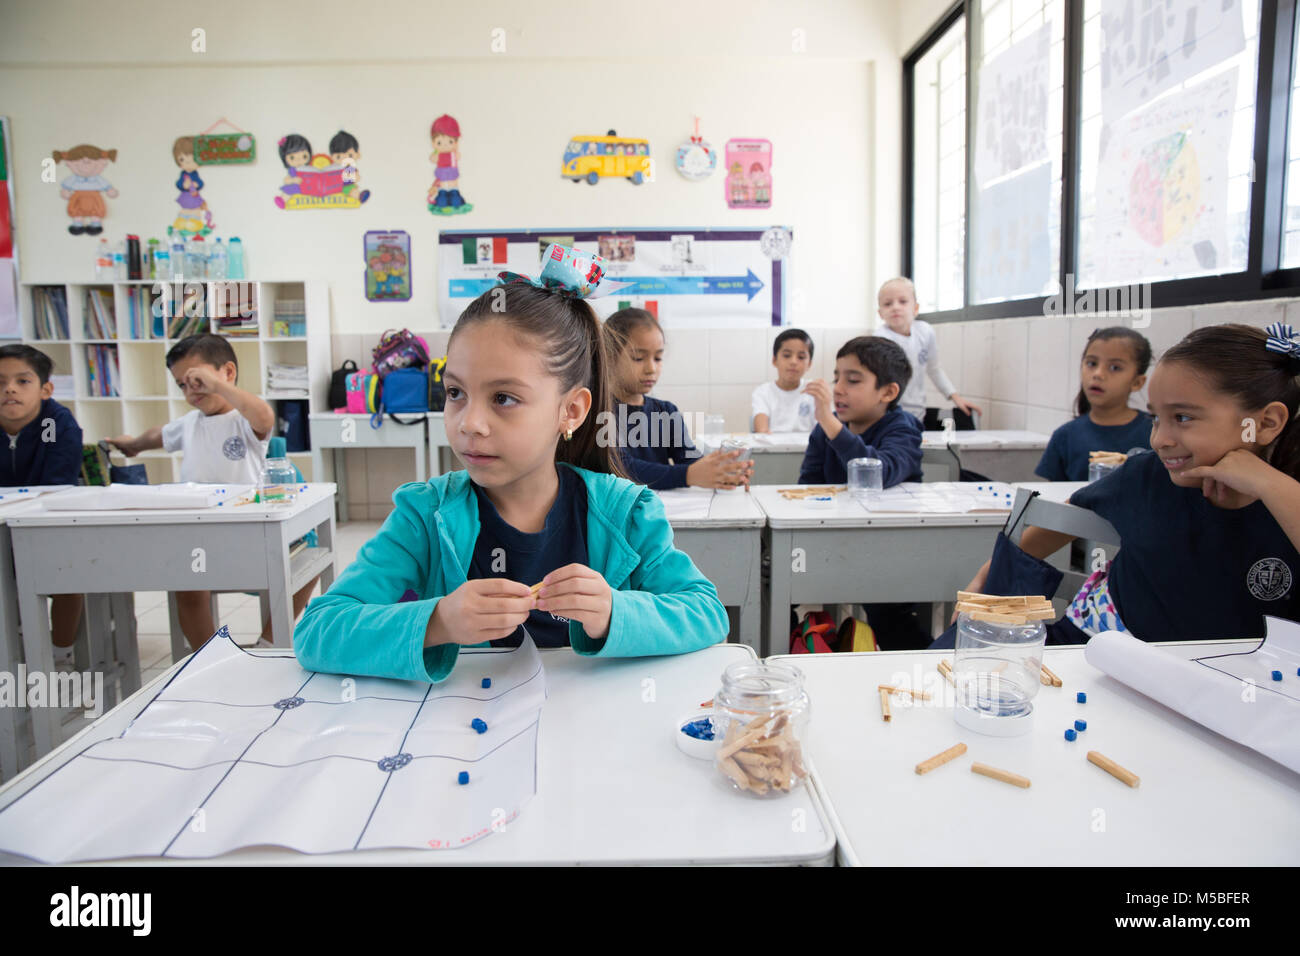 Mariana Parra Rosado attends a Mayan mathematics class at Escuela Modelo primary school in Merida, Yucatan, Mexico on December 19, 2017. Maya mathematics constituted the most sophisticated mathematical system ever developed in the Americas. The Maya counting system required only three symbols to form all their numbers: a dot representing one, a bar representing five, and a shell representing 20 or zero, depending on its placement. The Maya used a base 20 (vigesimal) numerical system, unlike our current base 10. (Photo by Bénédicte Desrus) Stock Photo